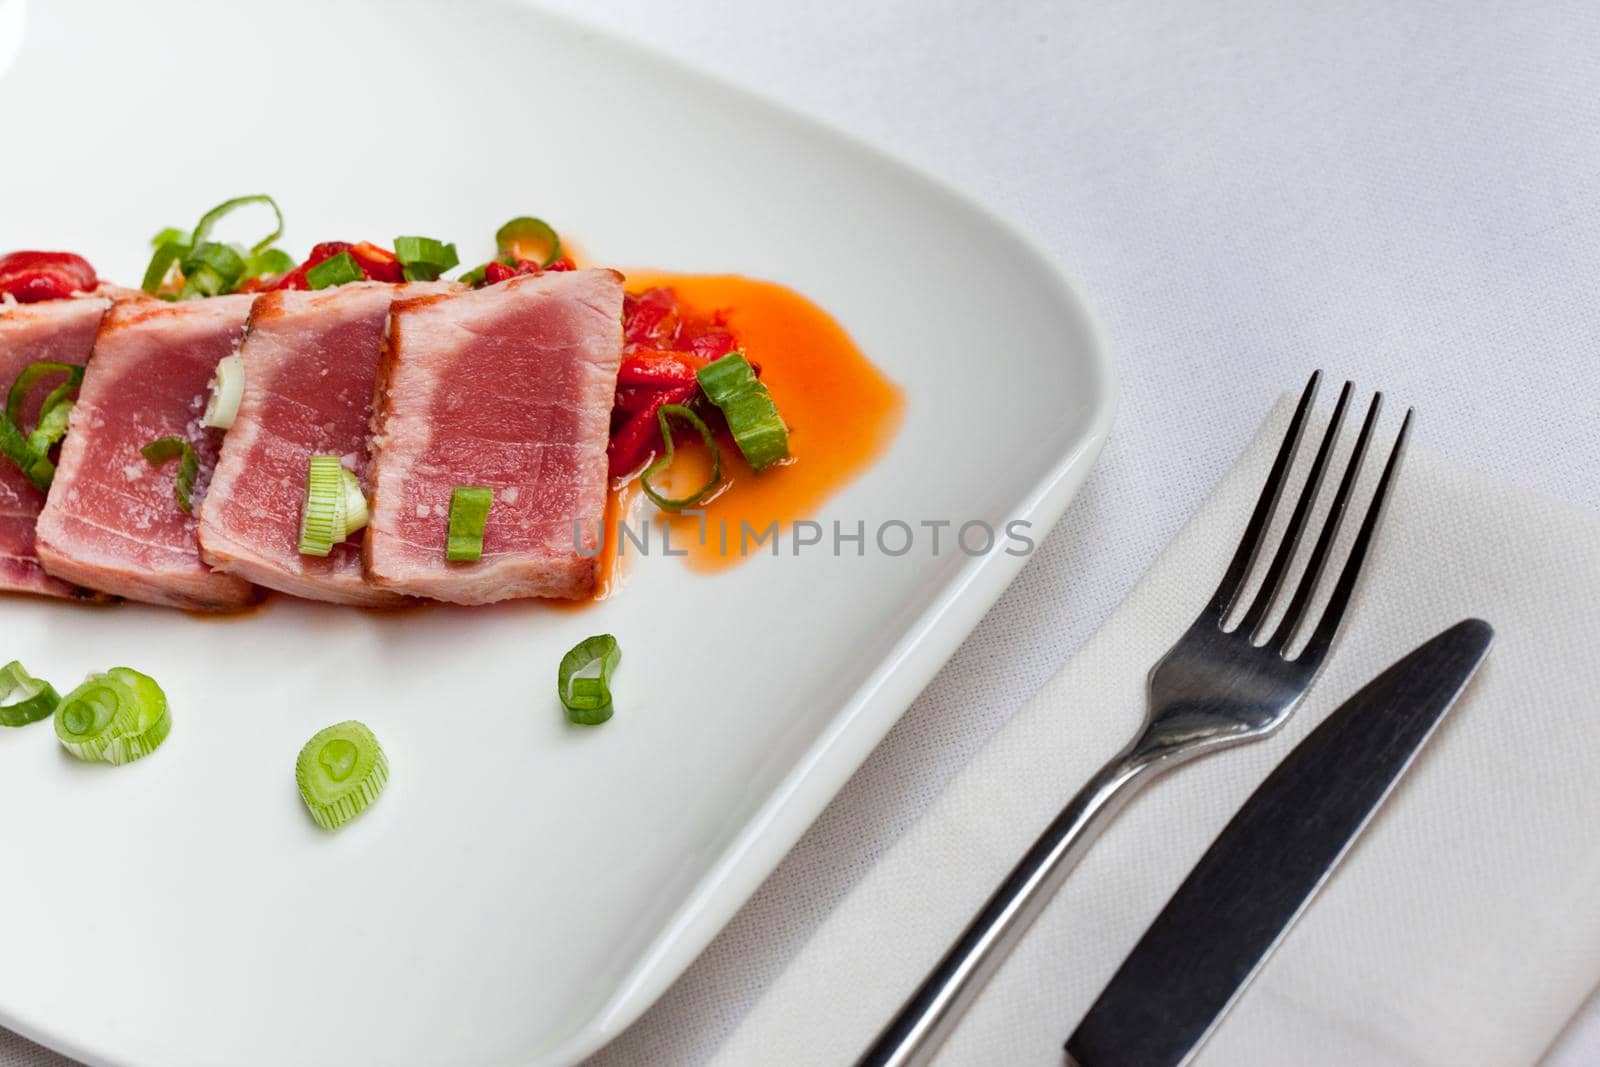 Slices of Tuna on a plate, onions and pepper sauce